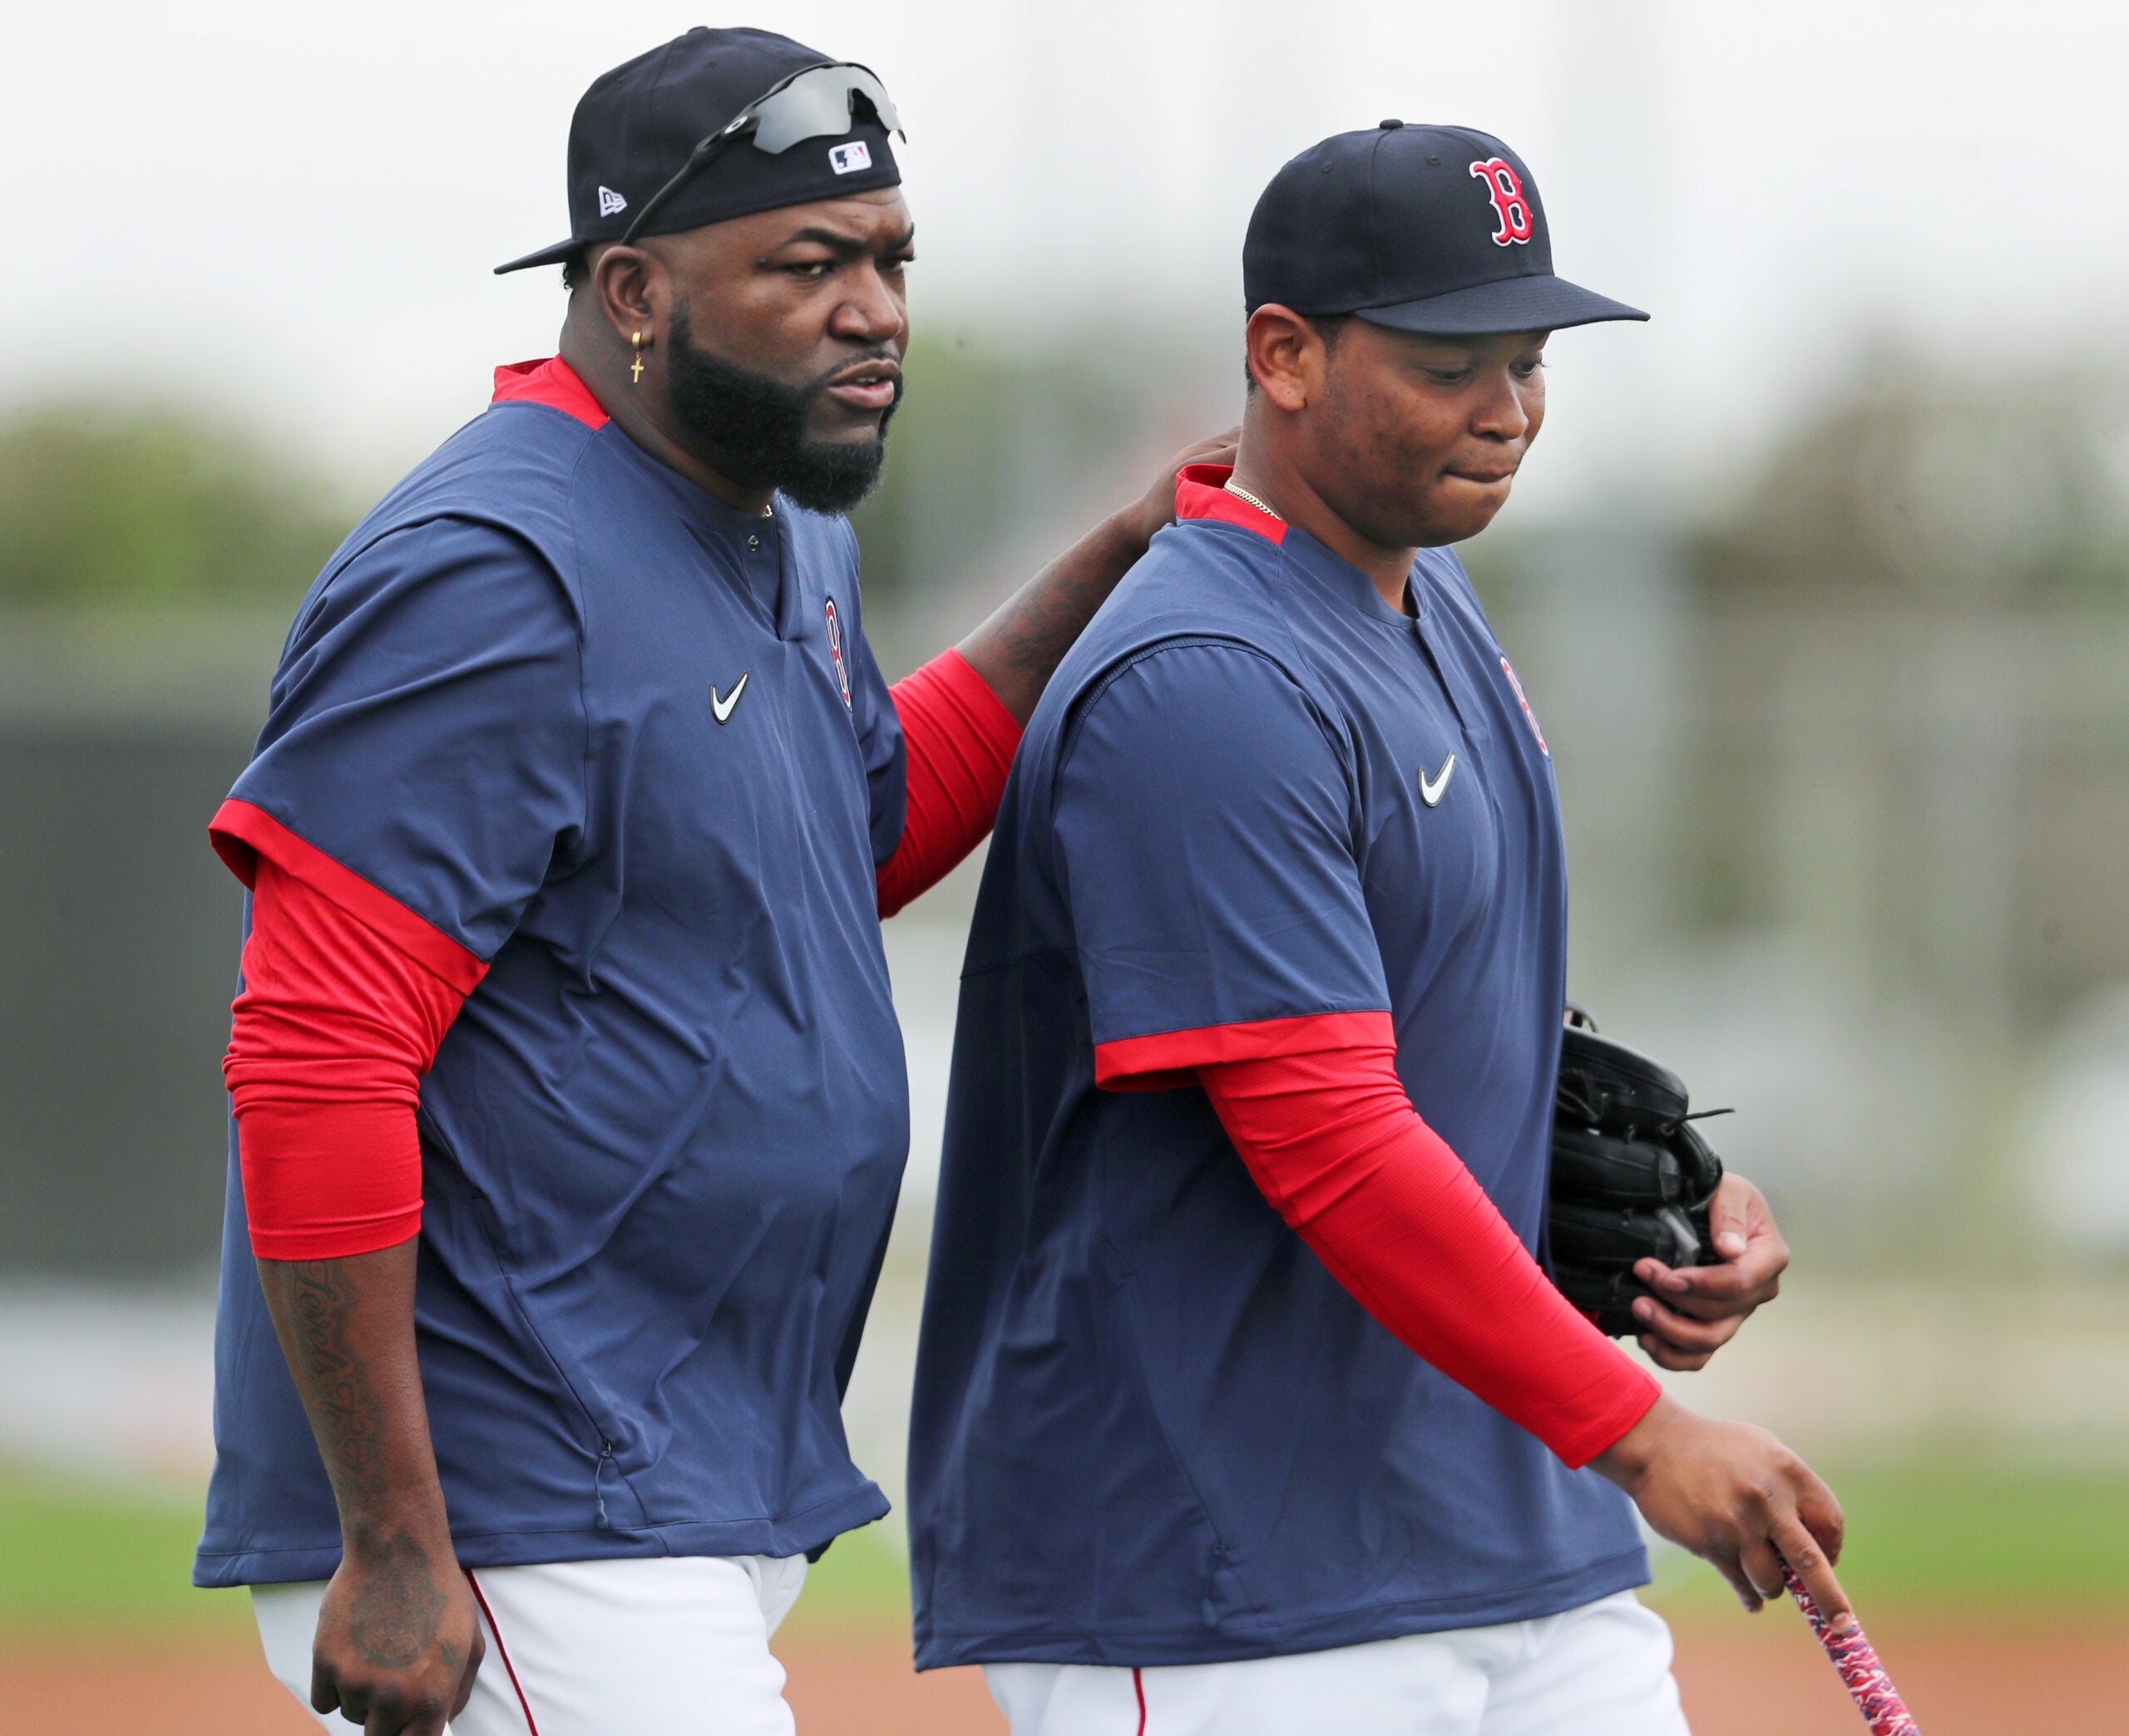 Rafael Devers (right) made his first appearence in camp today, he is pictured with David Ortiz (left) before he started to participate in a workout. The Red Sox continued Spring Training workouts today at the Jet Blue Park complex.